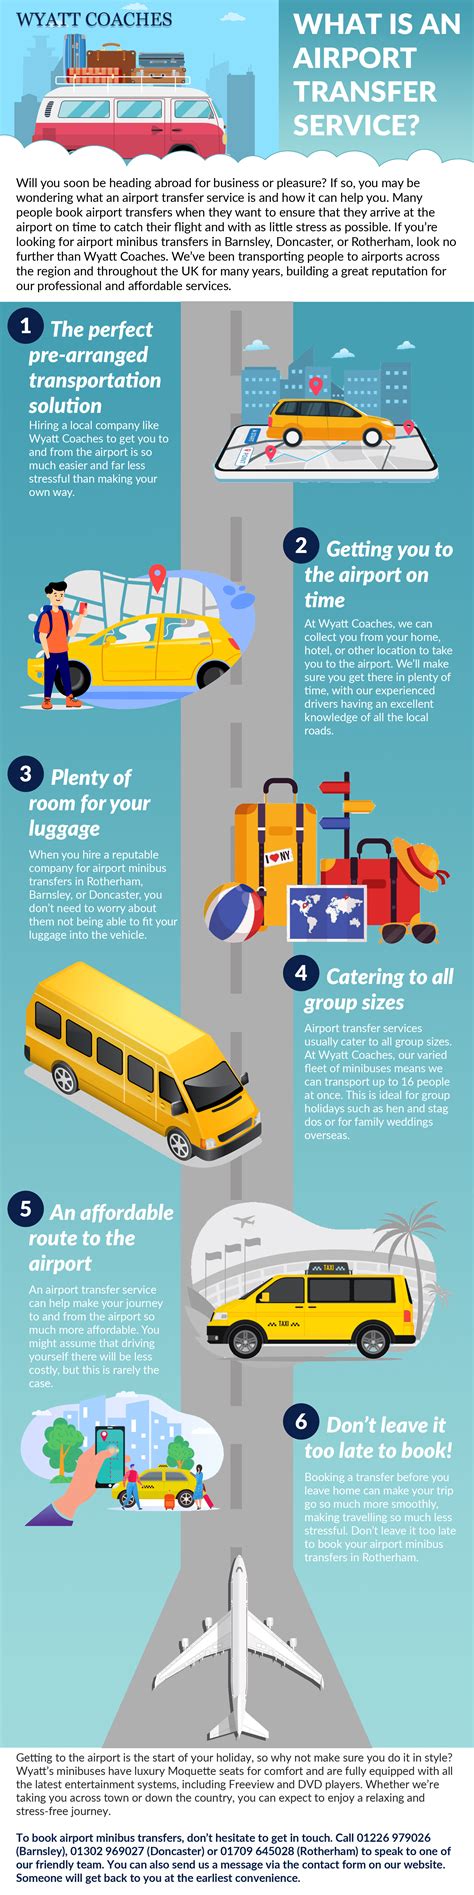 What Is An Airport Transfer Service Infographic Wyatt Coaches